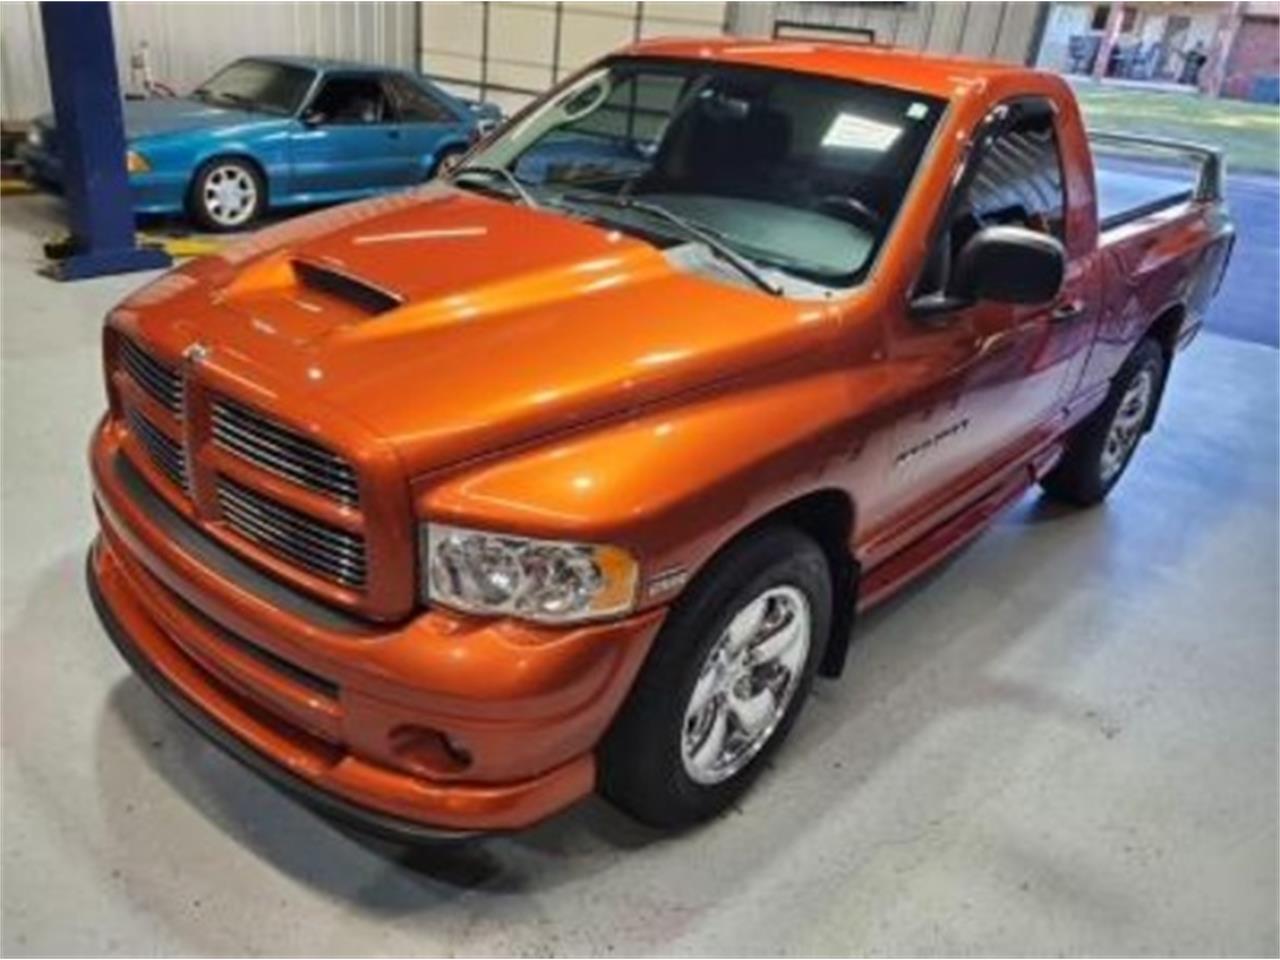 For Sale at Auction: 2005 Dodge Ram in Shawnee, Oklahoma for sale in Shawnee, OK